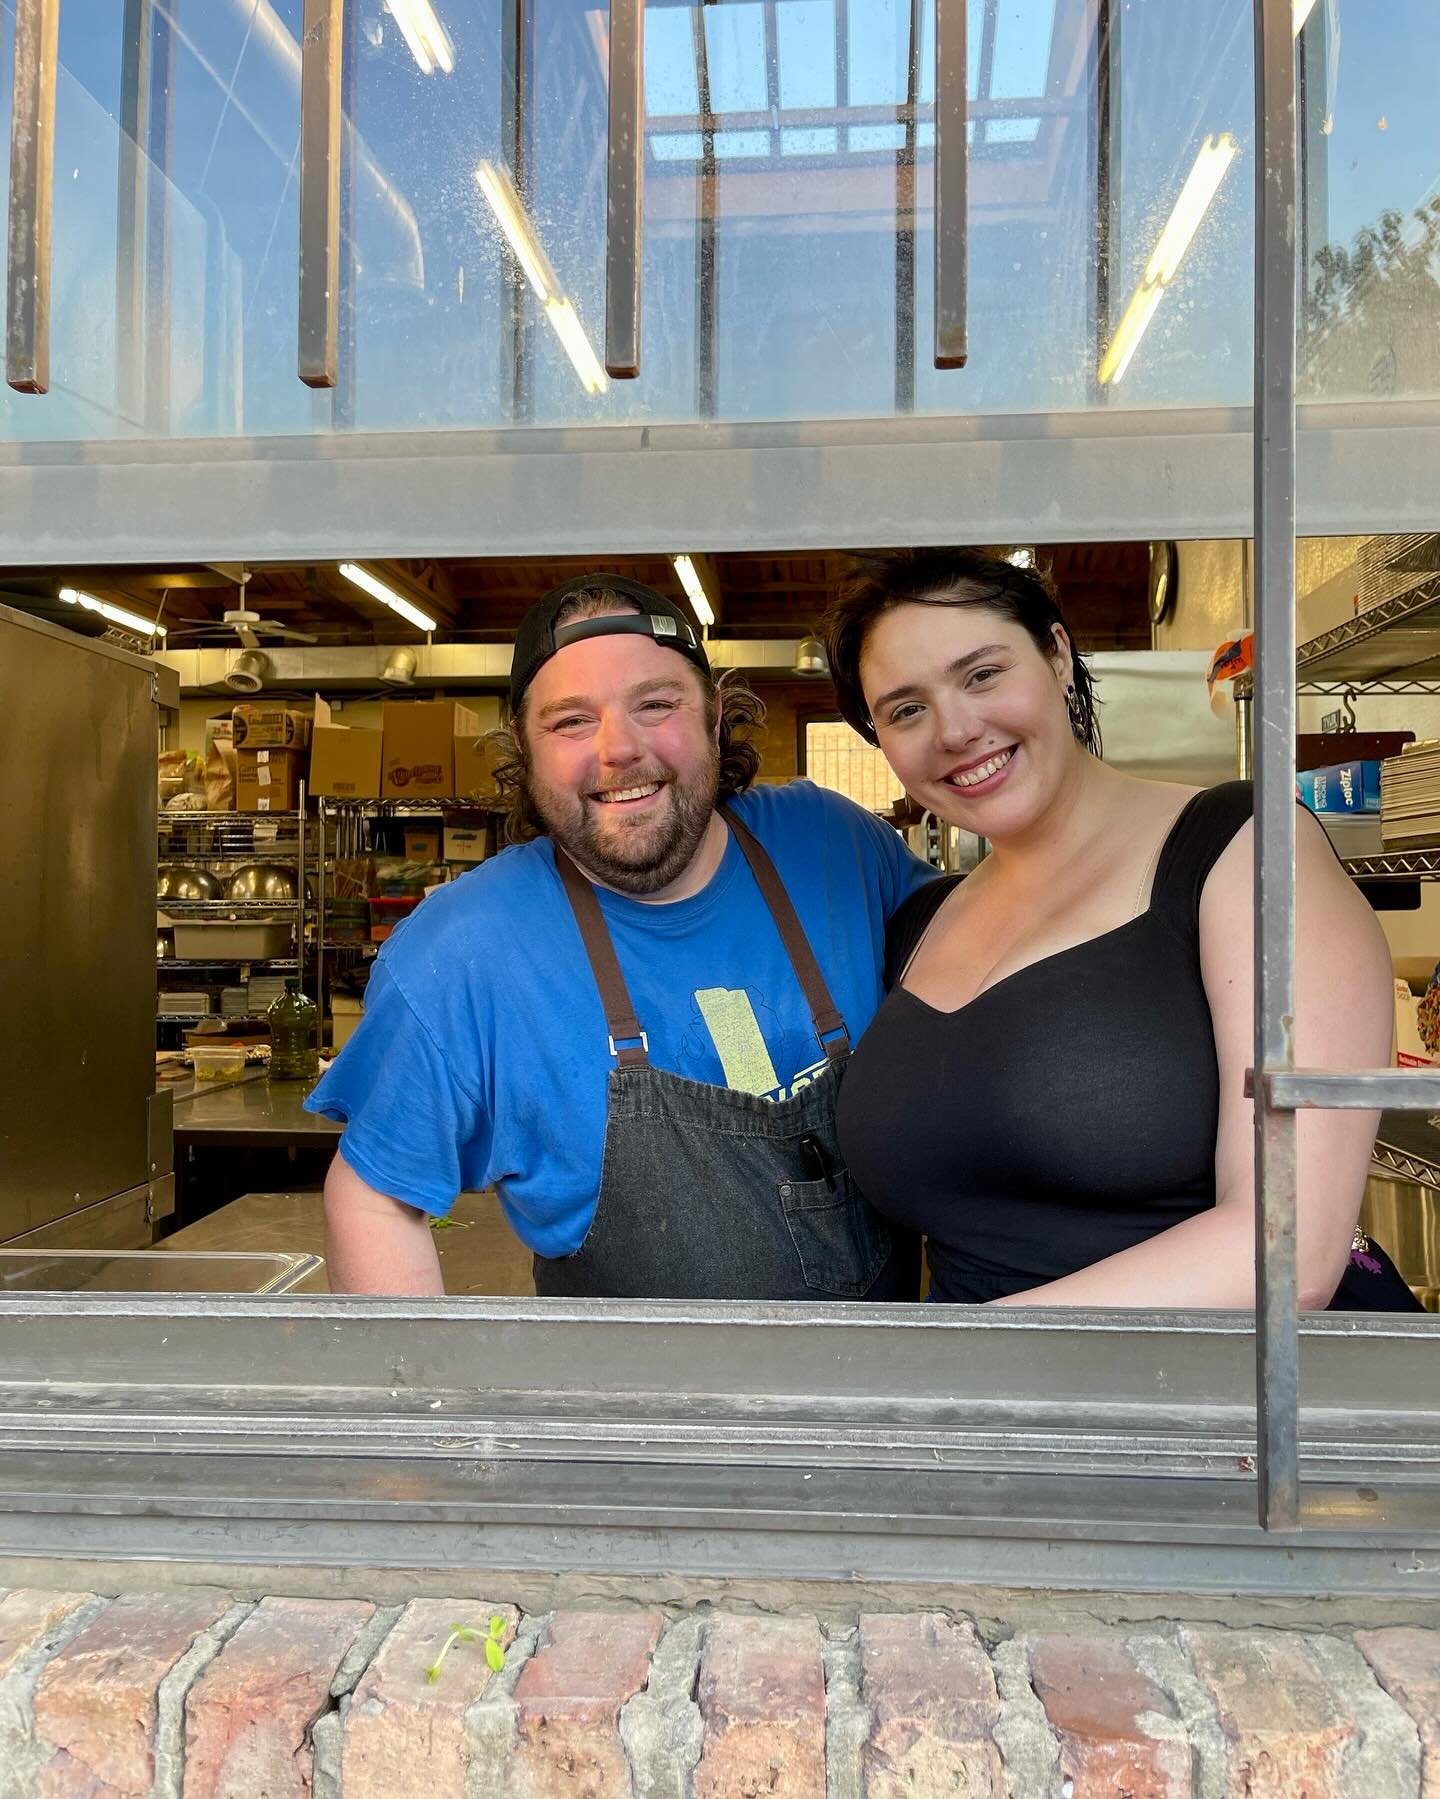 We&rsquo;re celebrating 3rd work anniversaries for these two very important people at BDP! 🎉 Head @chefbry and our Wedding + Event Producer, Jasmine, both joined the team in 2021 and have been so invaluable to the growth of BDP! ❤️❤️

Bryan and Jasm